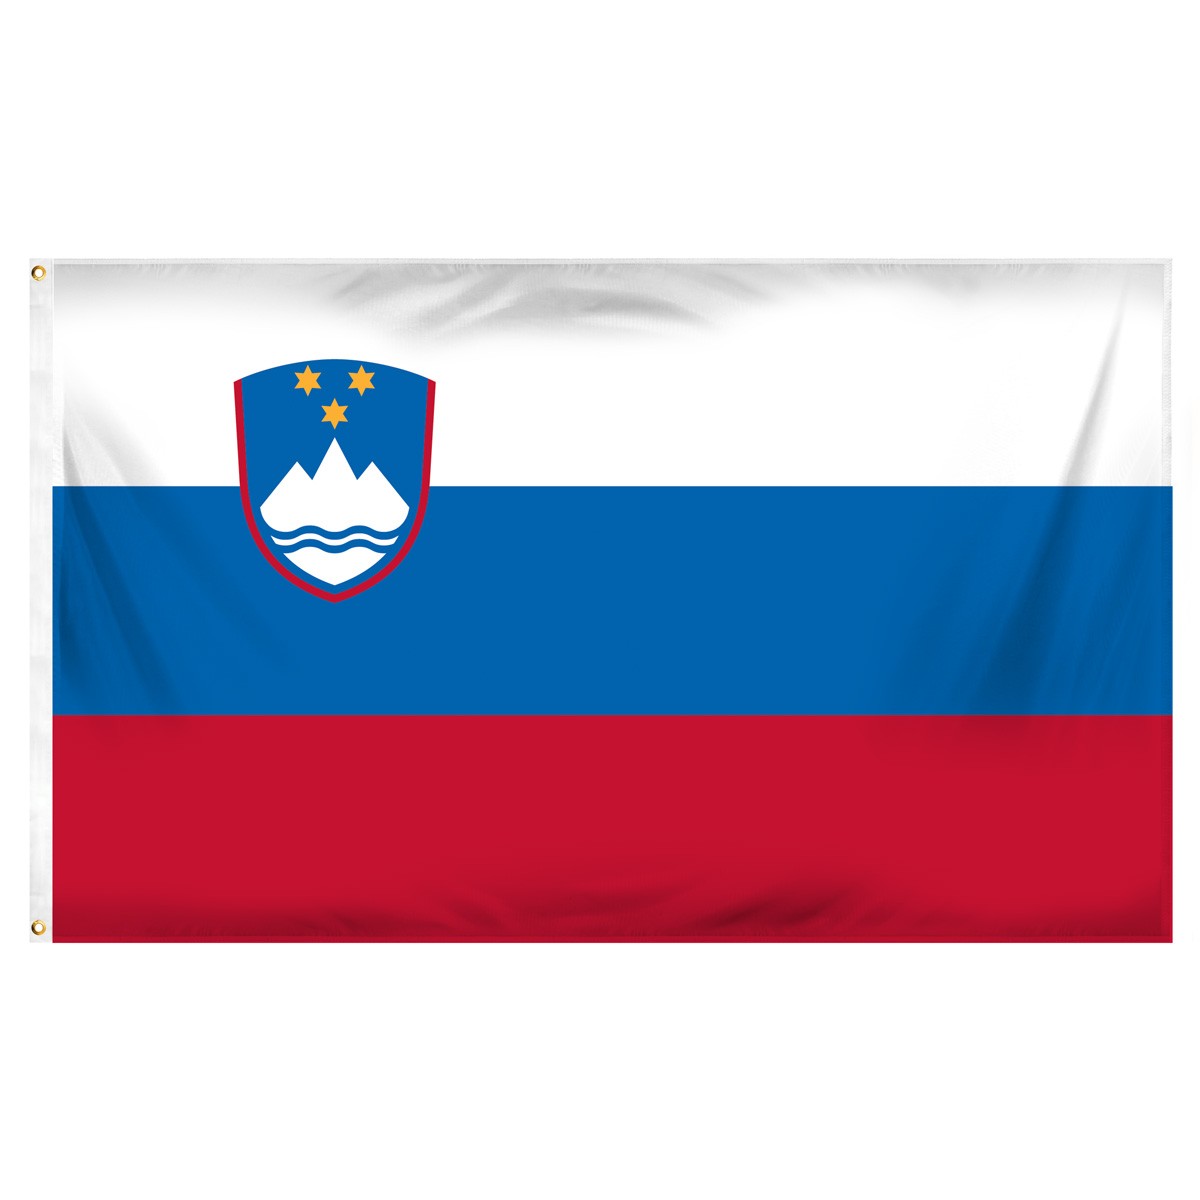 Slovenia Building Pennants and Flags